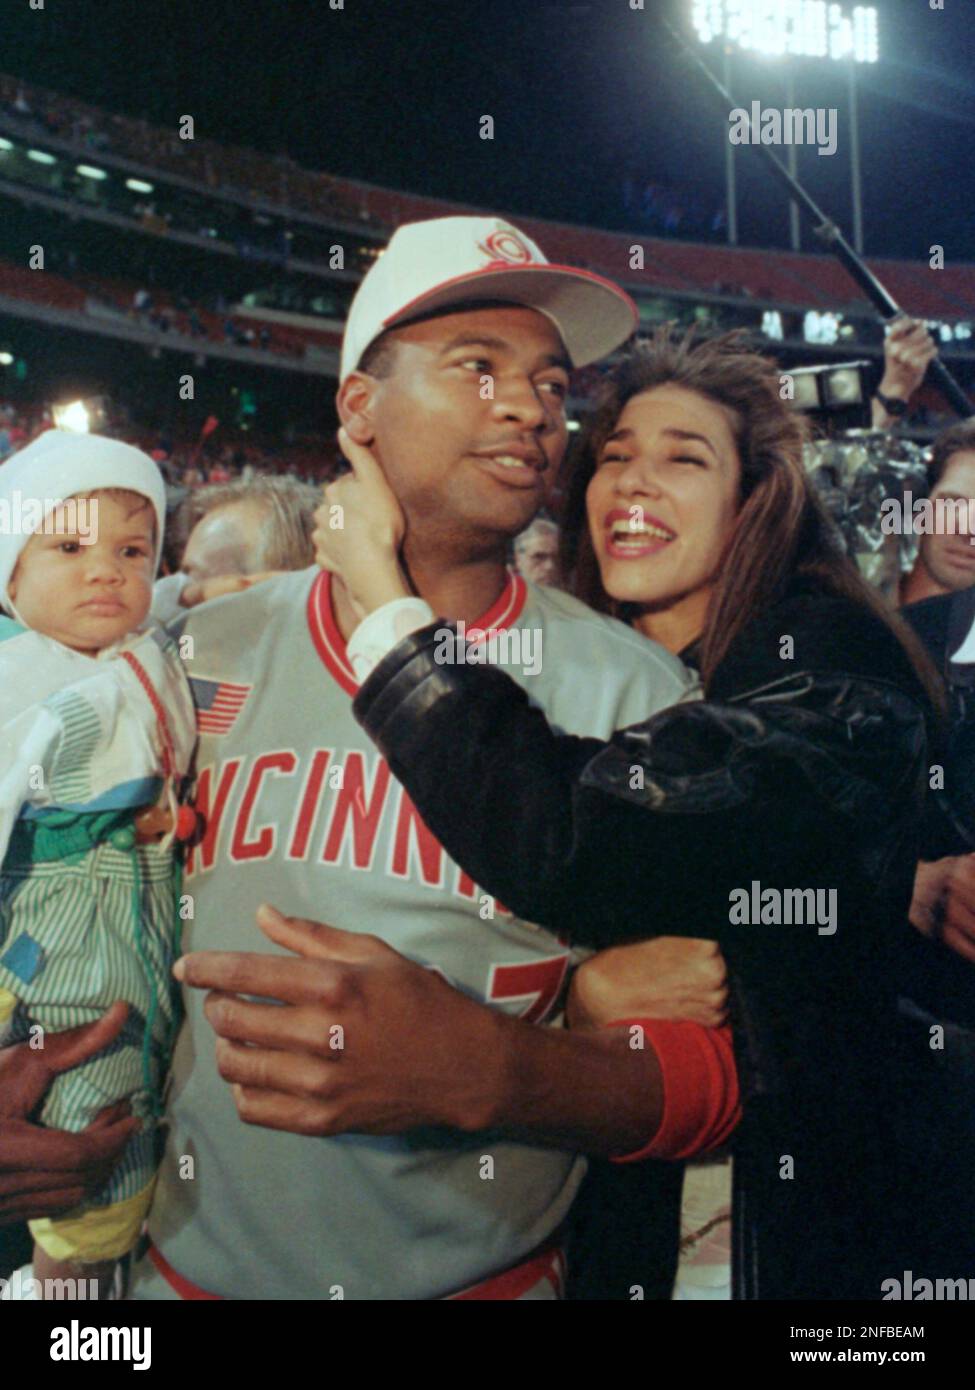 Cincinnati Reds pitcher Jose Rijo hugs his wife, Rosie Rijo, and his son,  Jose Rijo Jr. on the field after the World Series win, Saturday, Oct. 20,  1990, Oakland, Calif. Rijo was